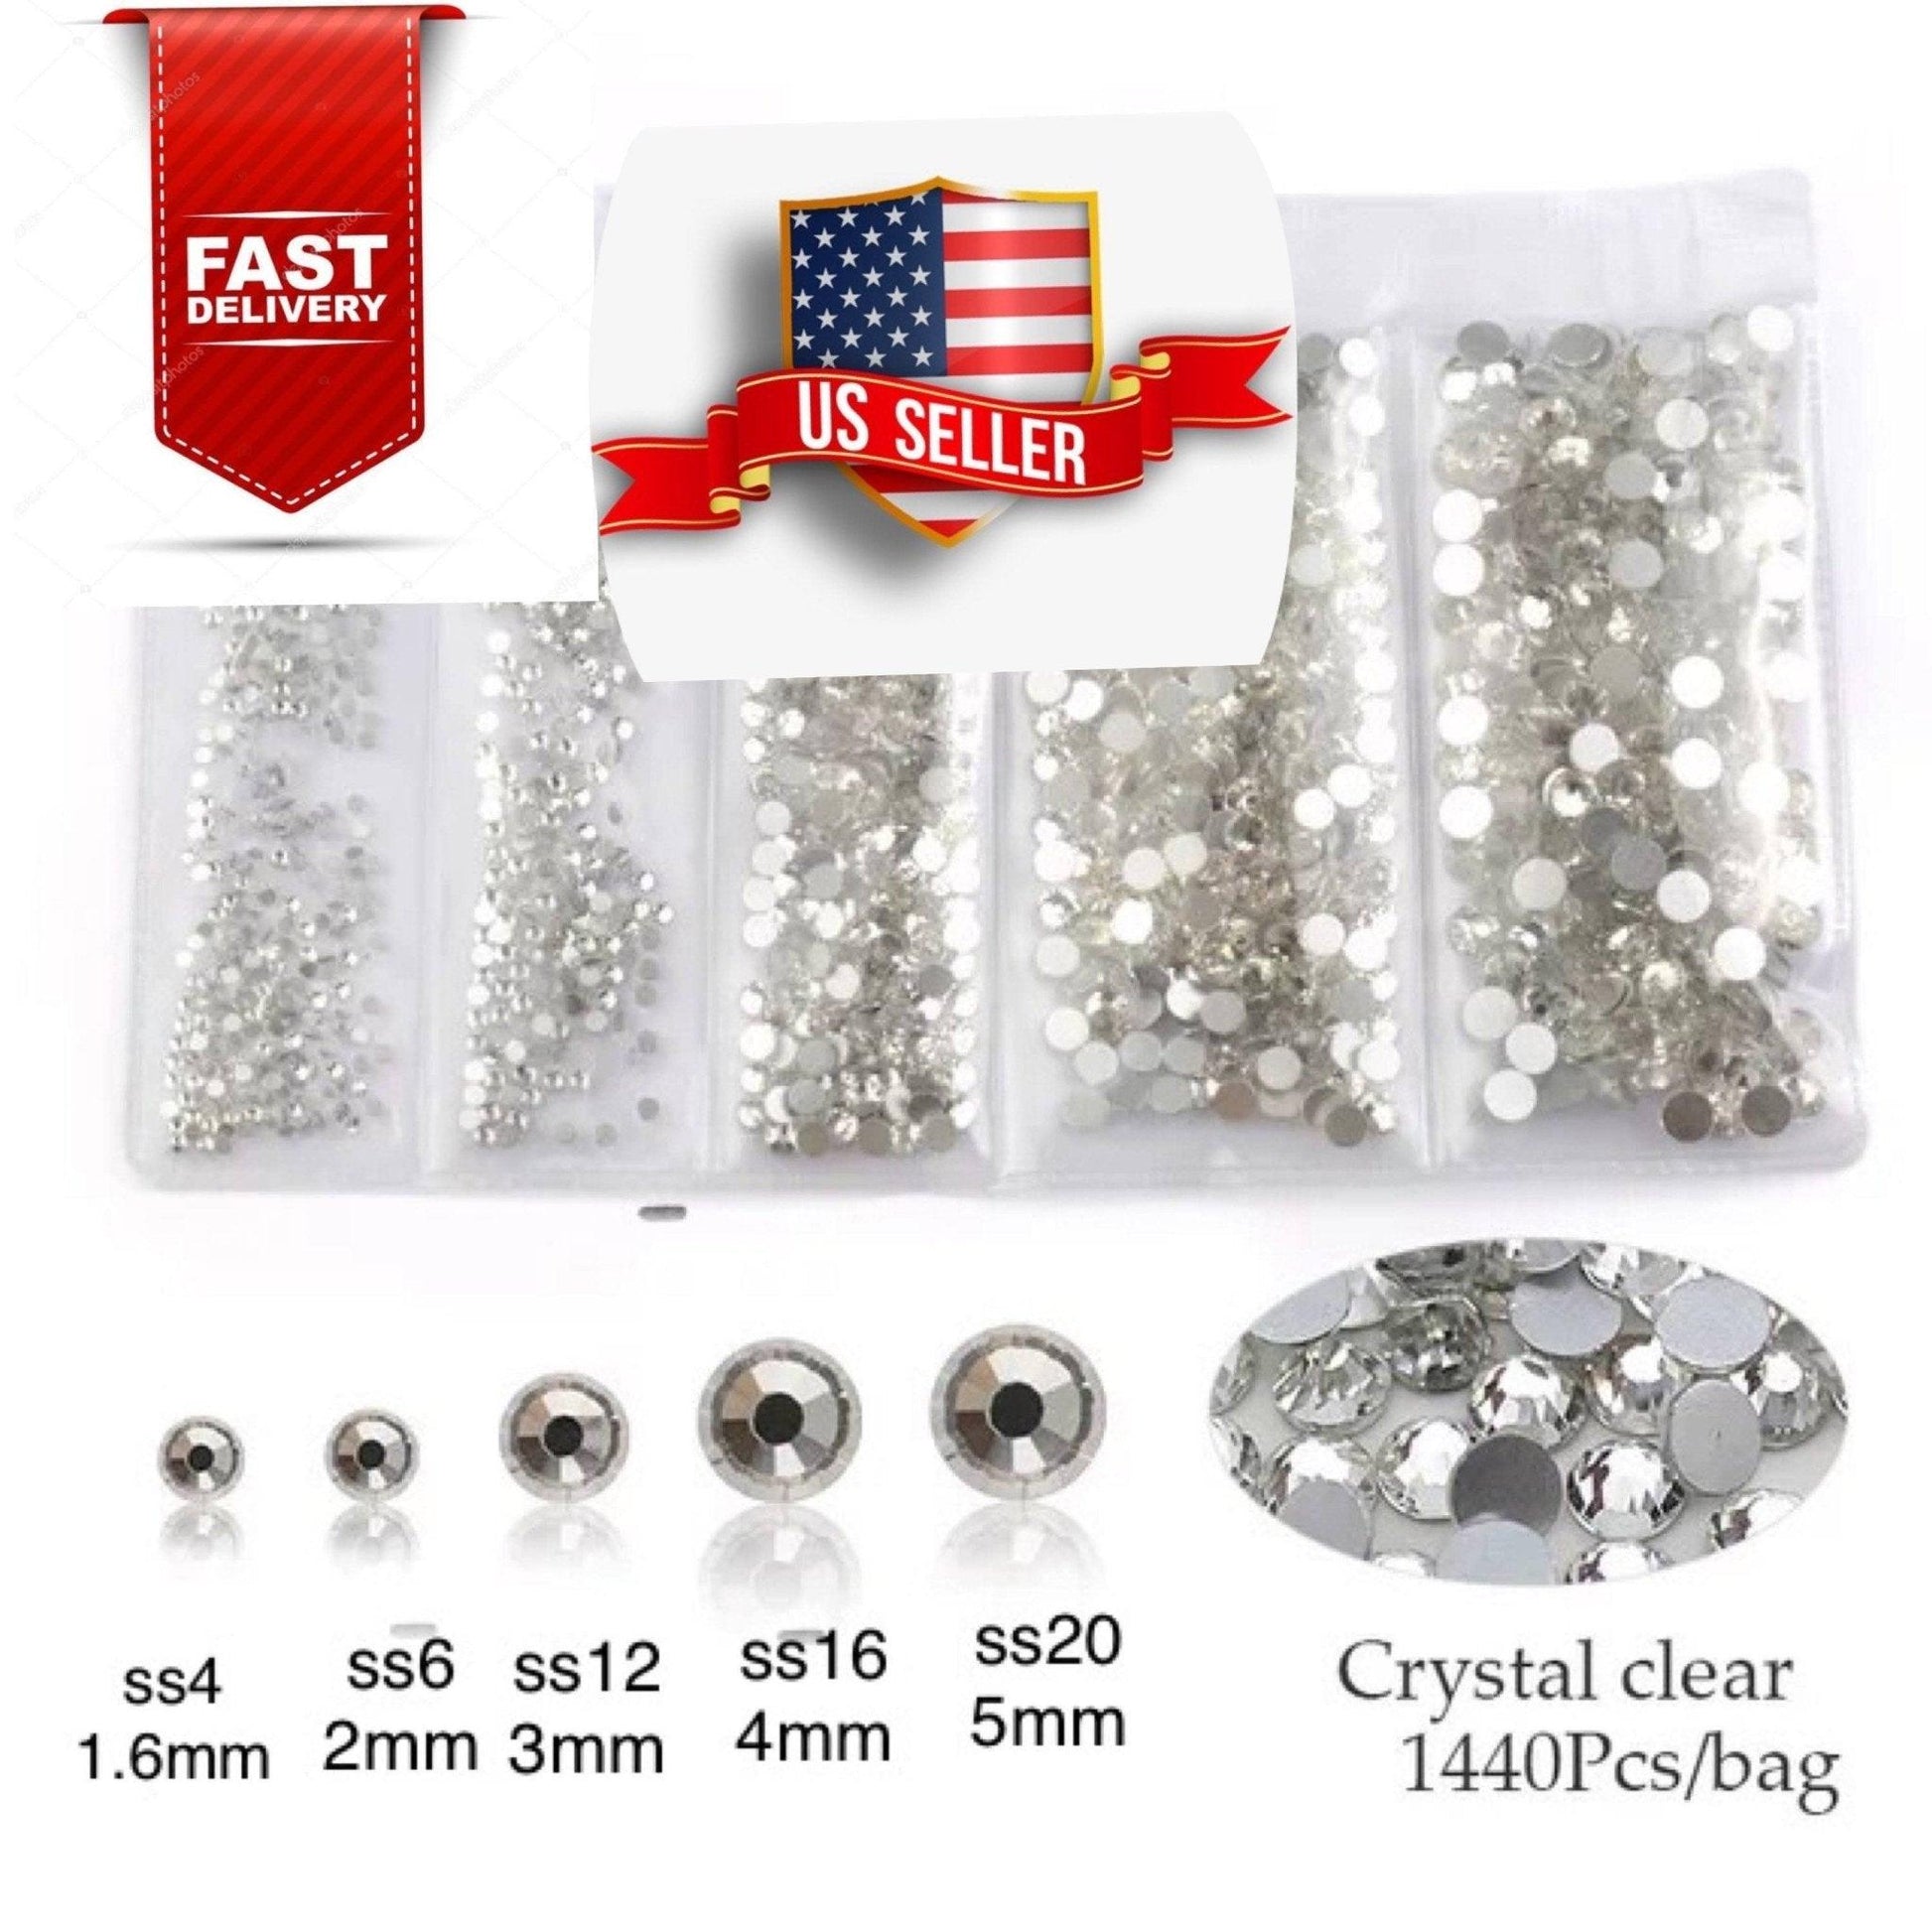 1440 Pieces mixed Size Super Shiny Crystal Clear Rhinestones